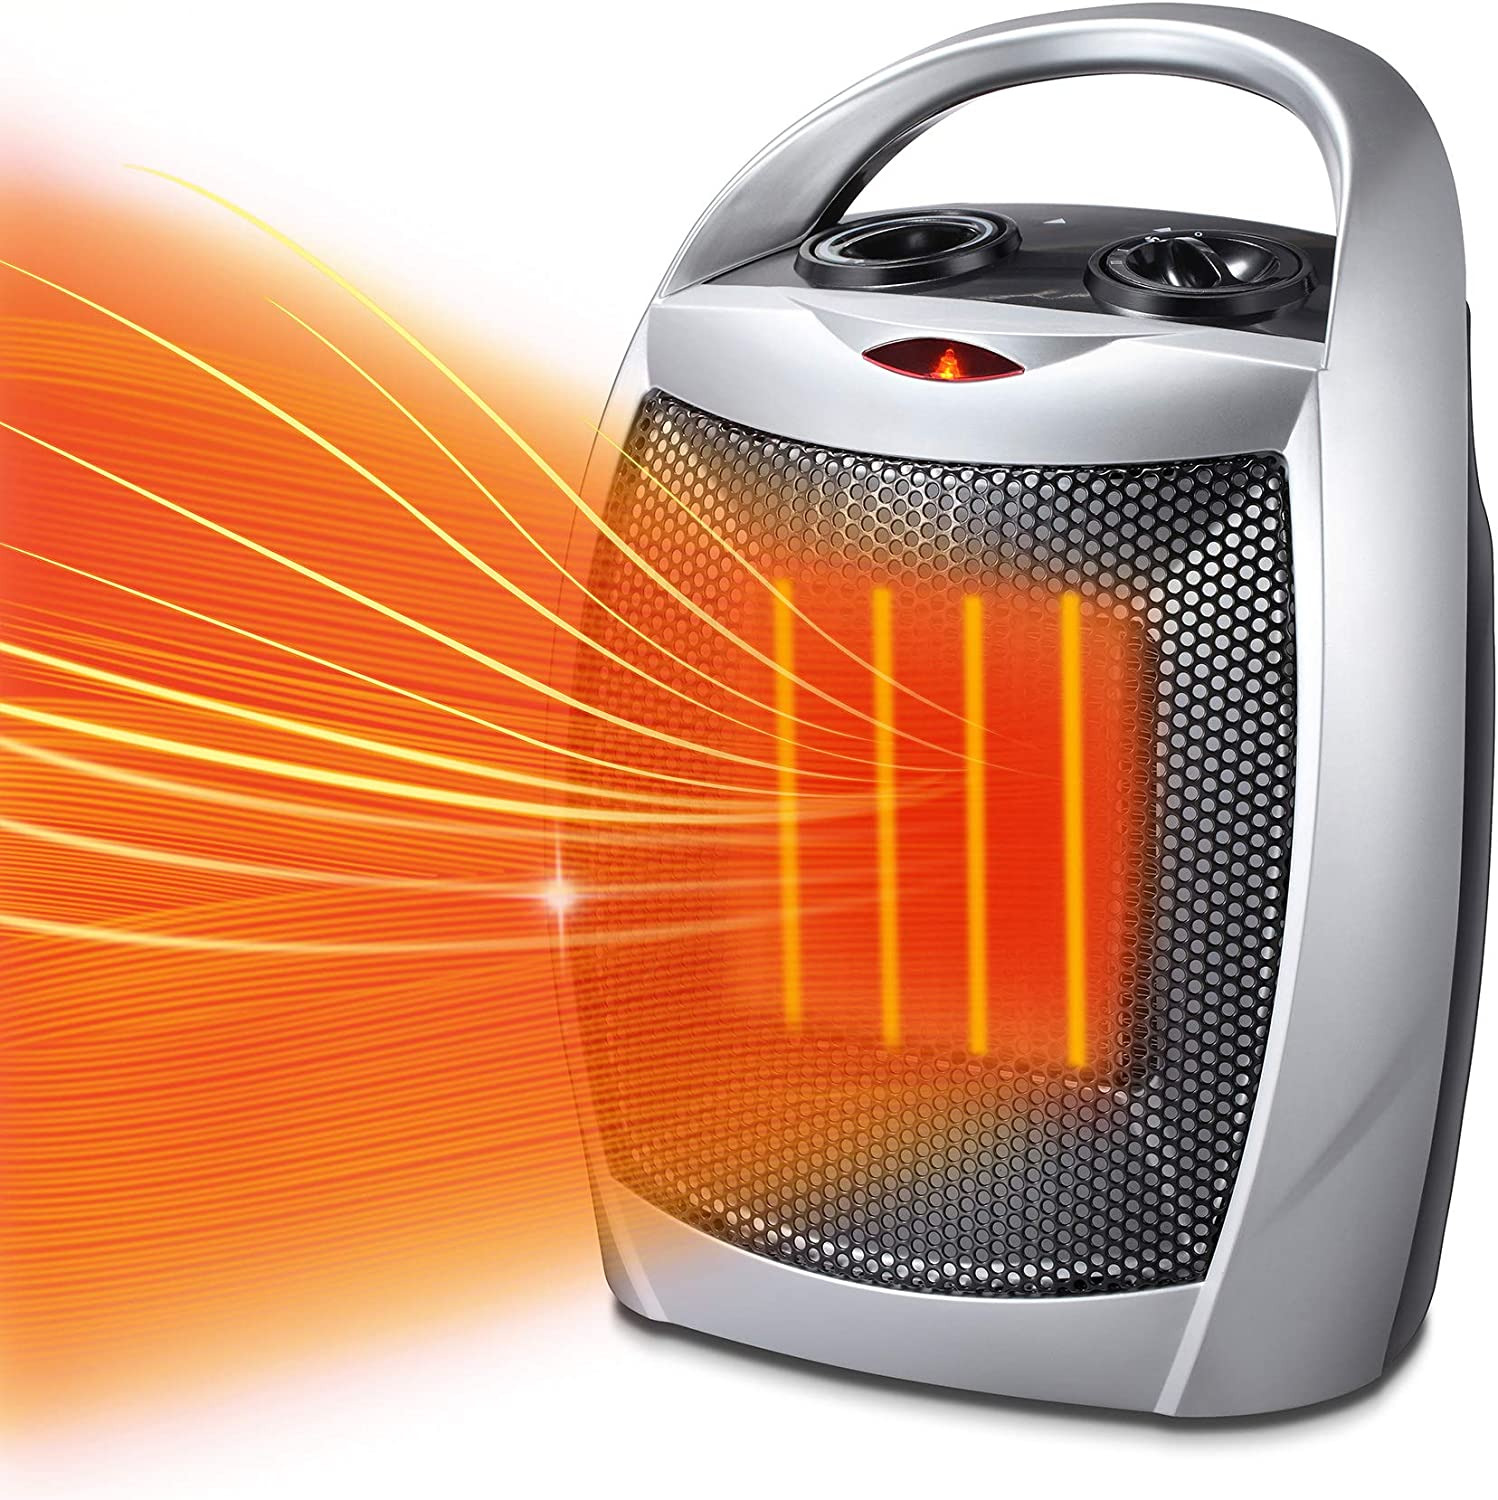 750W/1500W Ceramic Space Heater, Adjustable Thermostat, Portable, ETL Listed